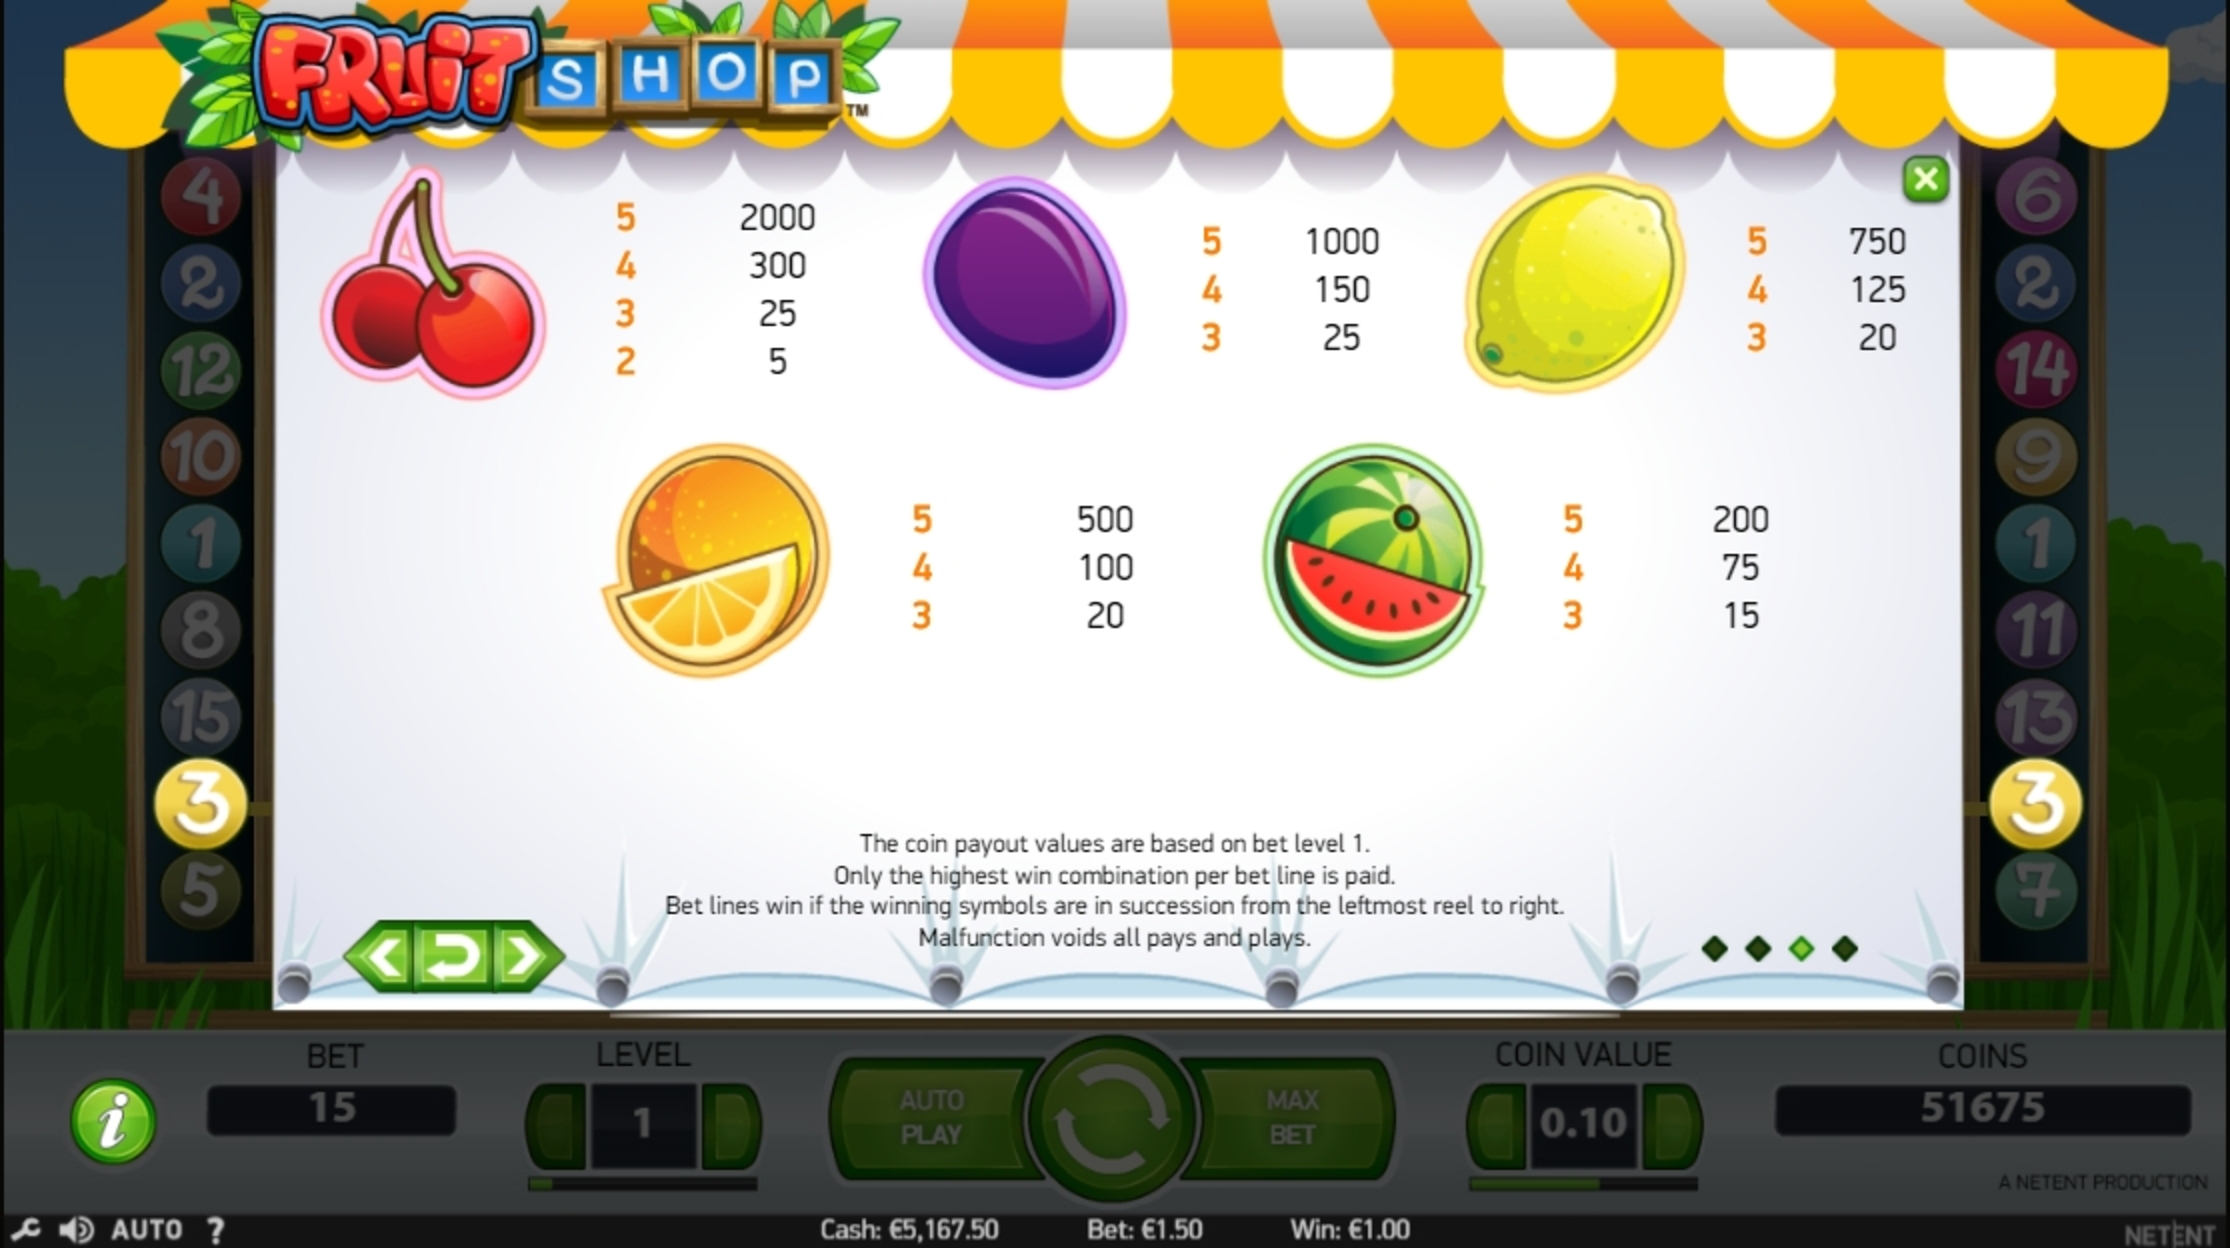 Info of Fruit Shop Slot Game by NetEnt